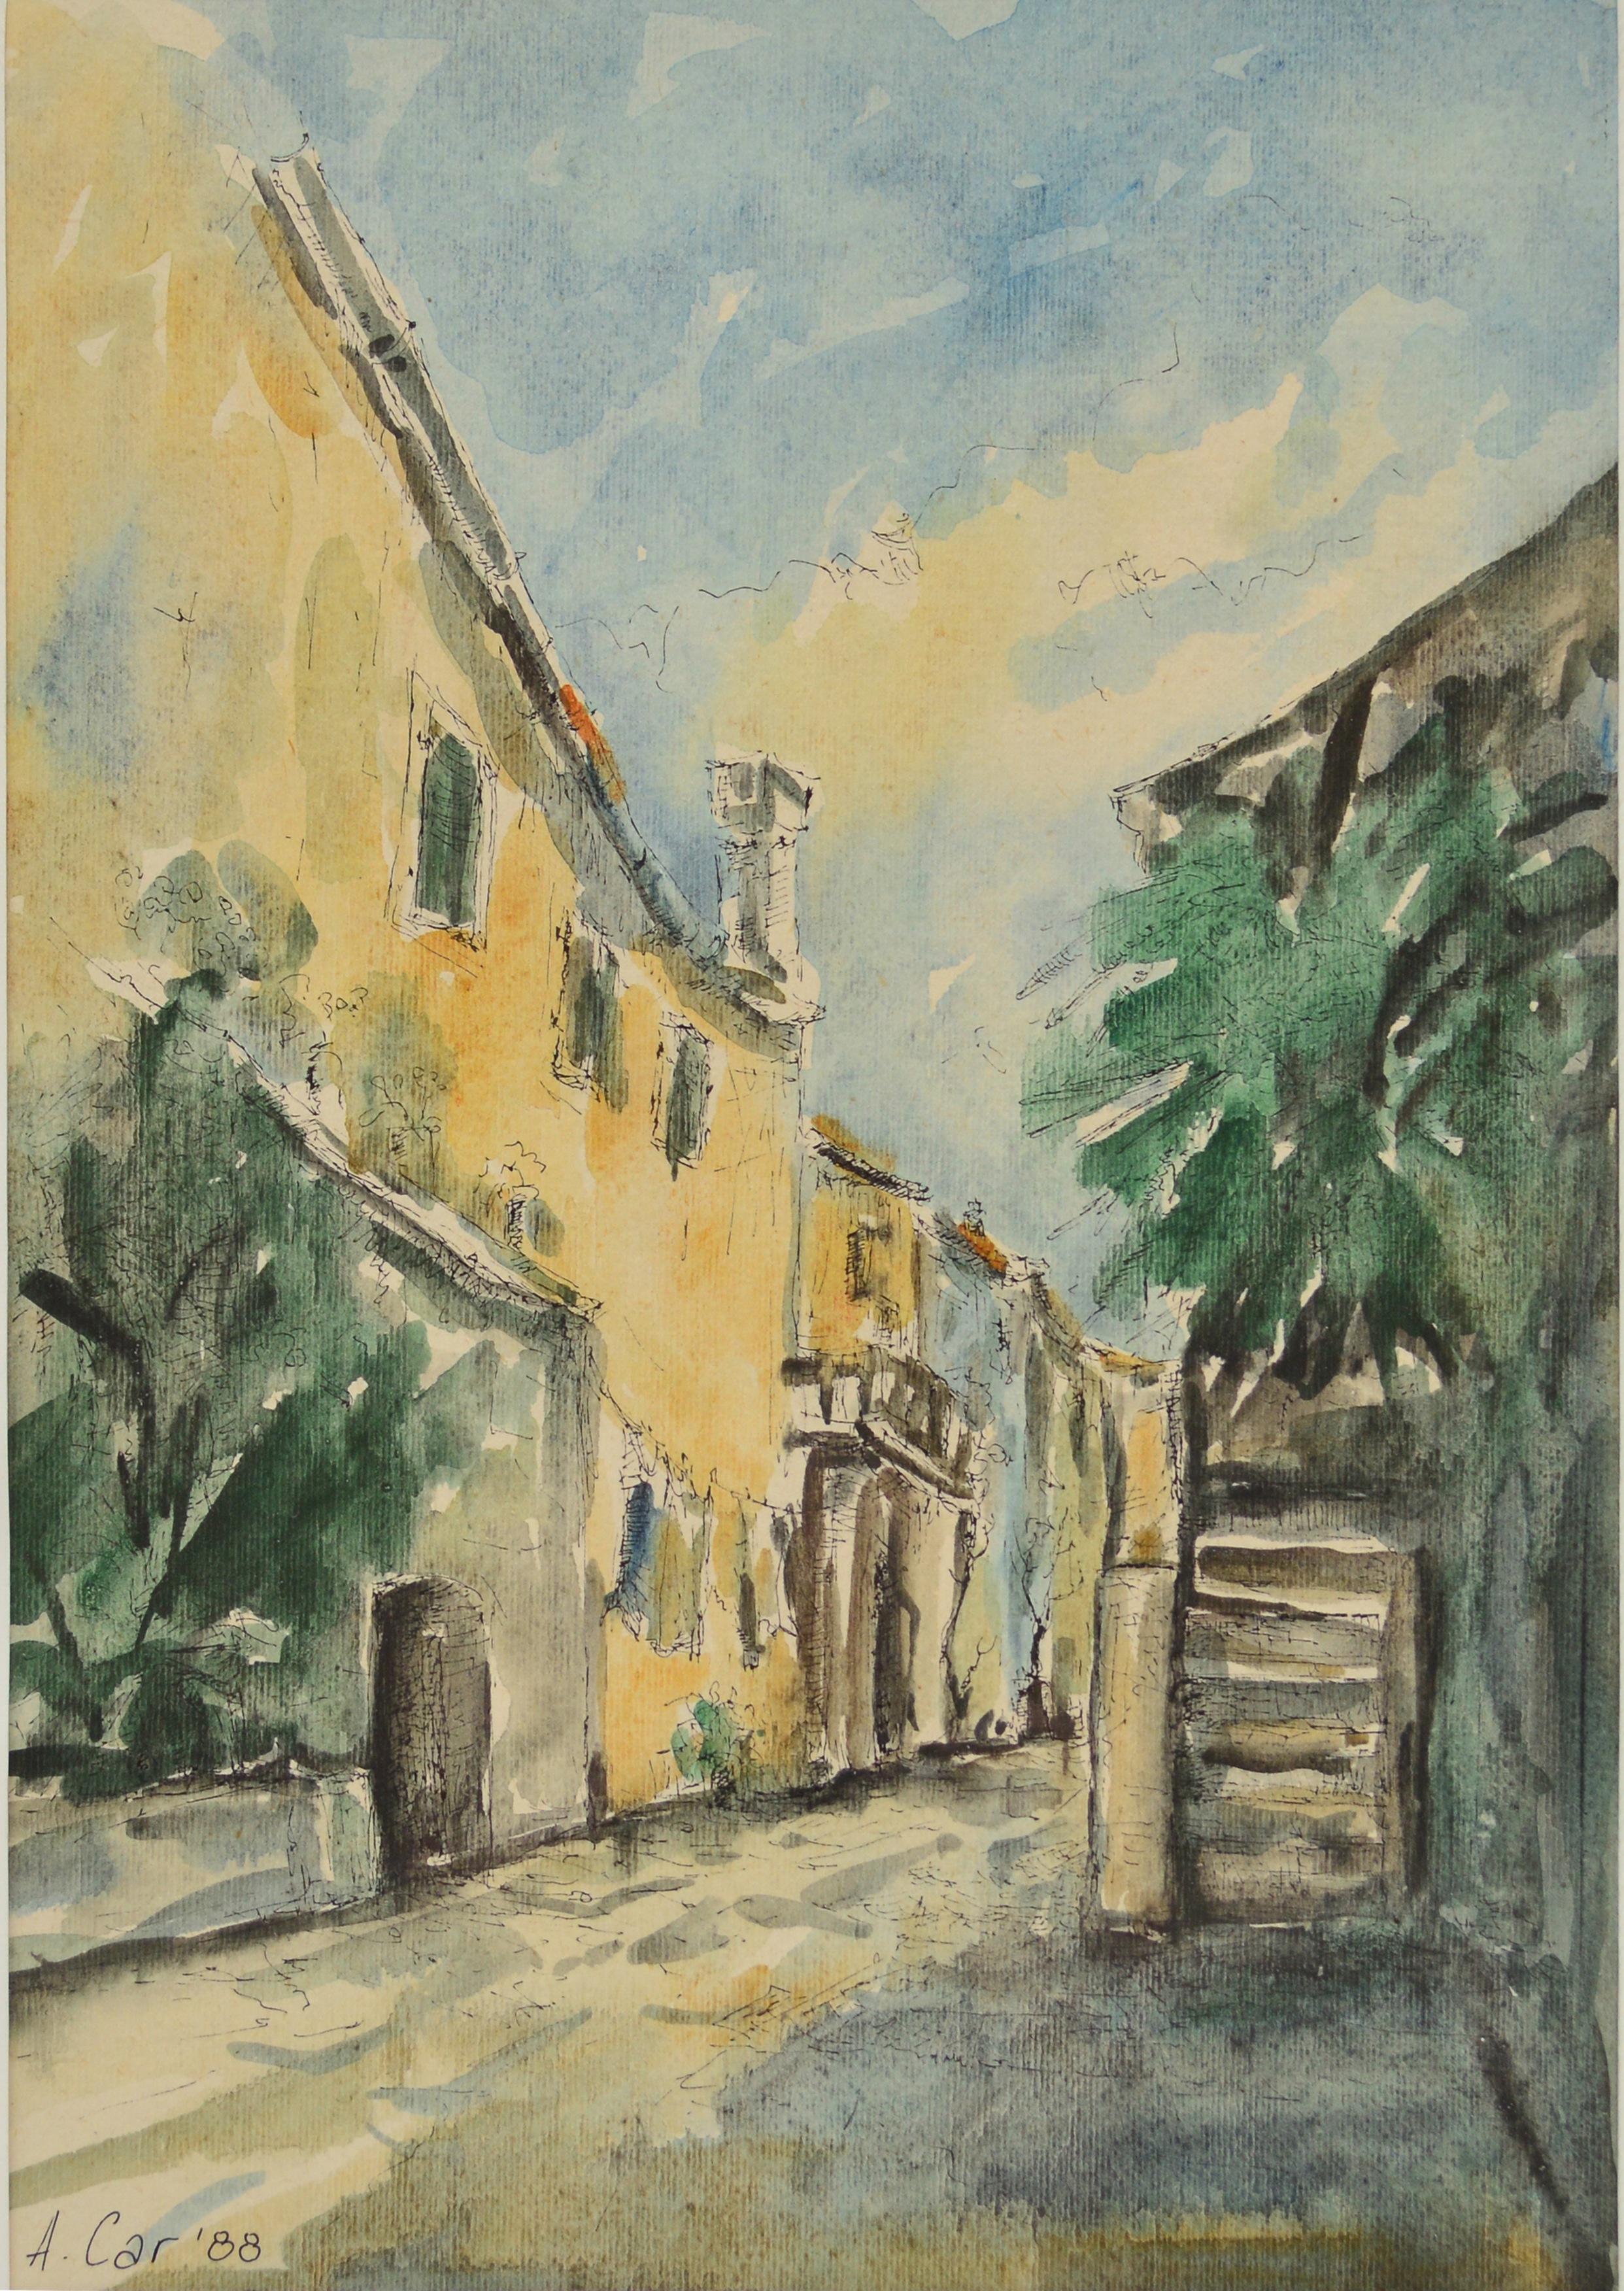 A CAR; pen, ink and watercolour, Continental street scene, signed and dated 1988, 28 x 20cm,